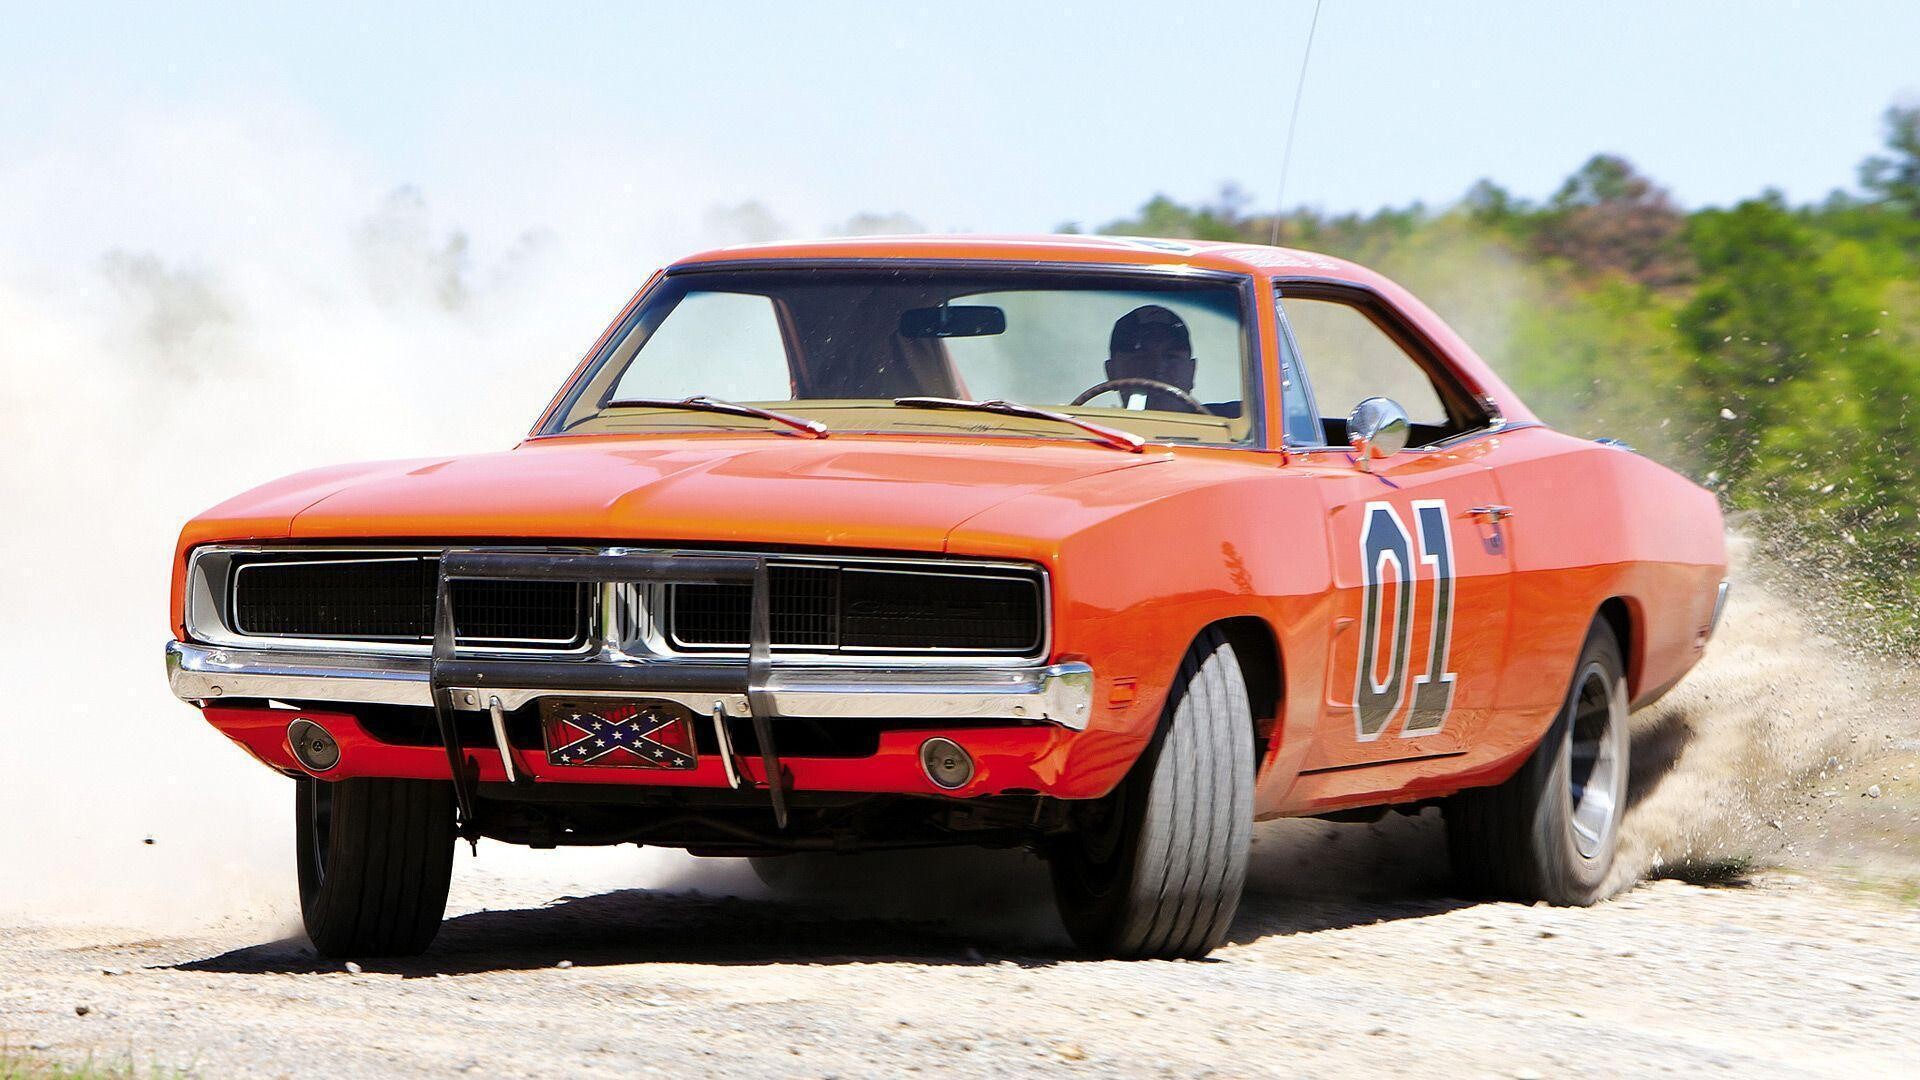 General Lee Car: Charger'69 stunts, Fancy driving, Extreme turns, High-speed drifting on dirt roads, Break-neck chase scenes. 1920x1080 Full HD Wallpaper.